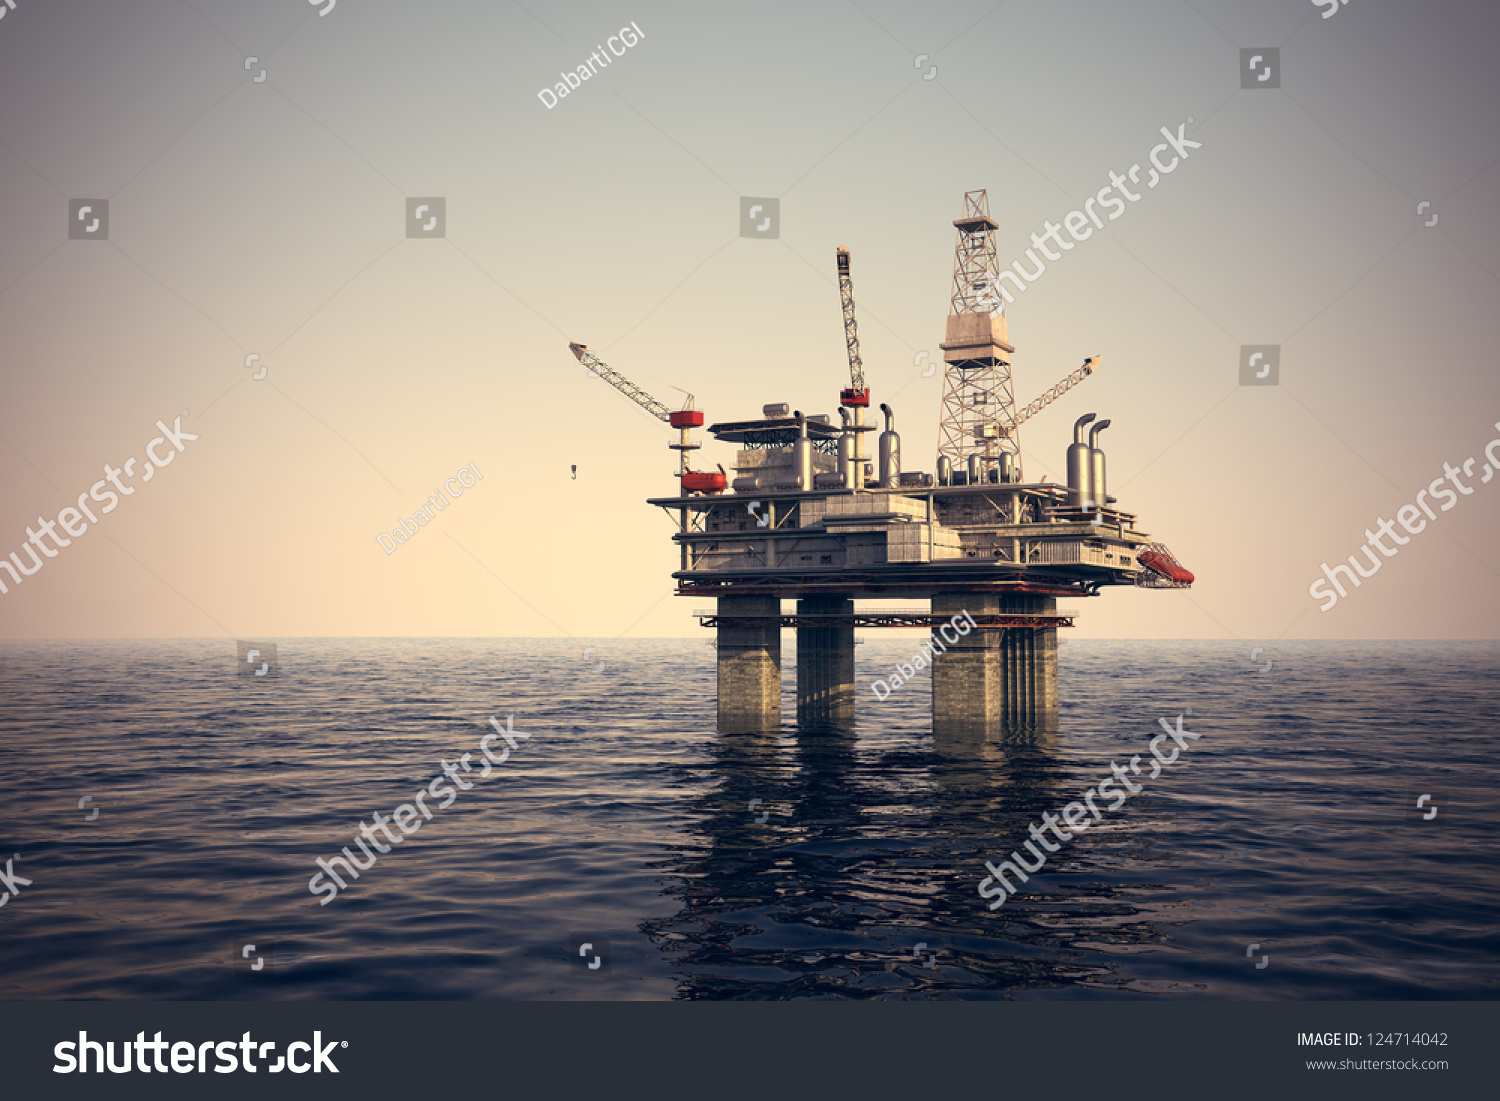 Image of oil platform while cloudless day. #124714042